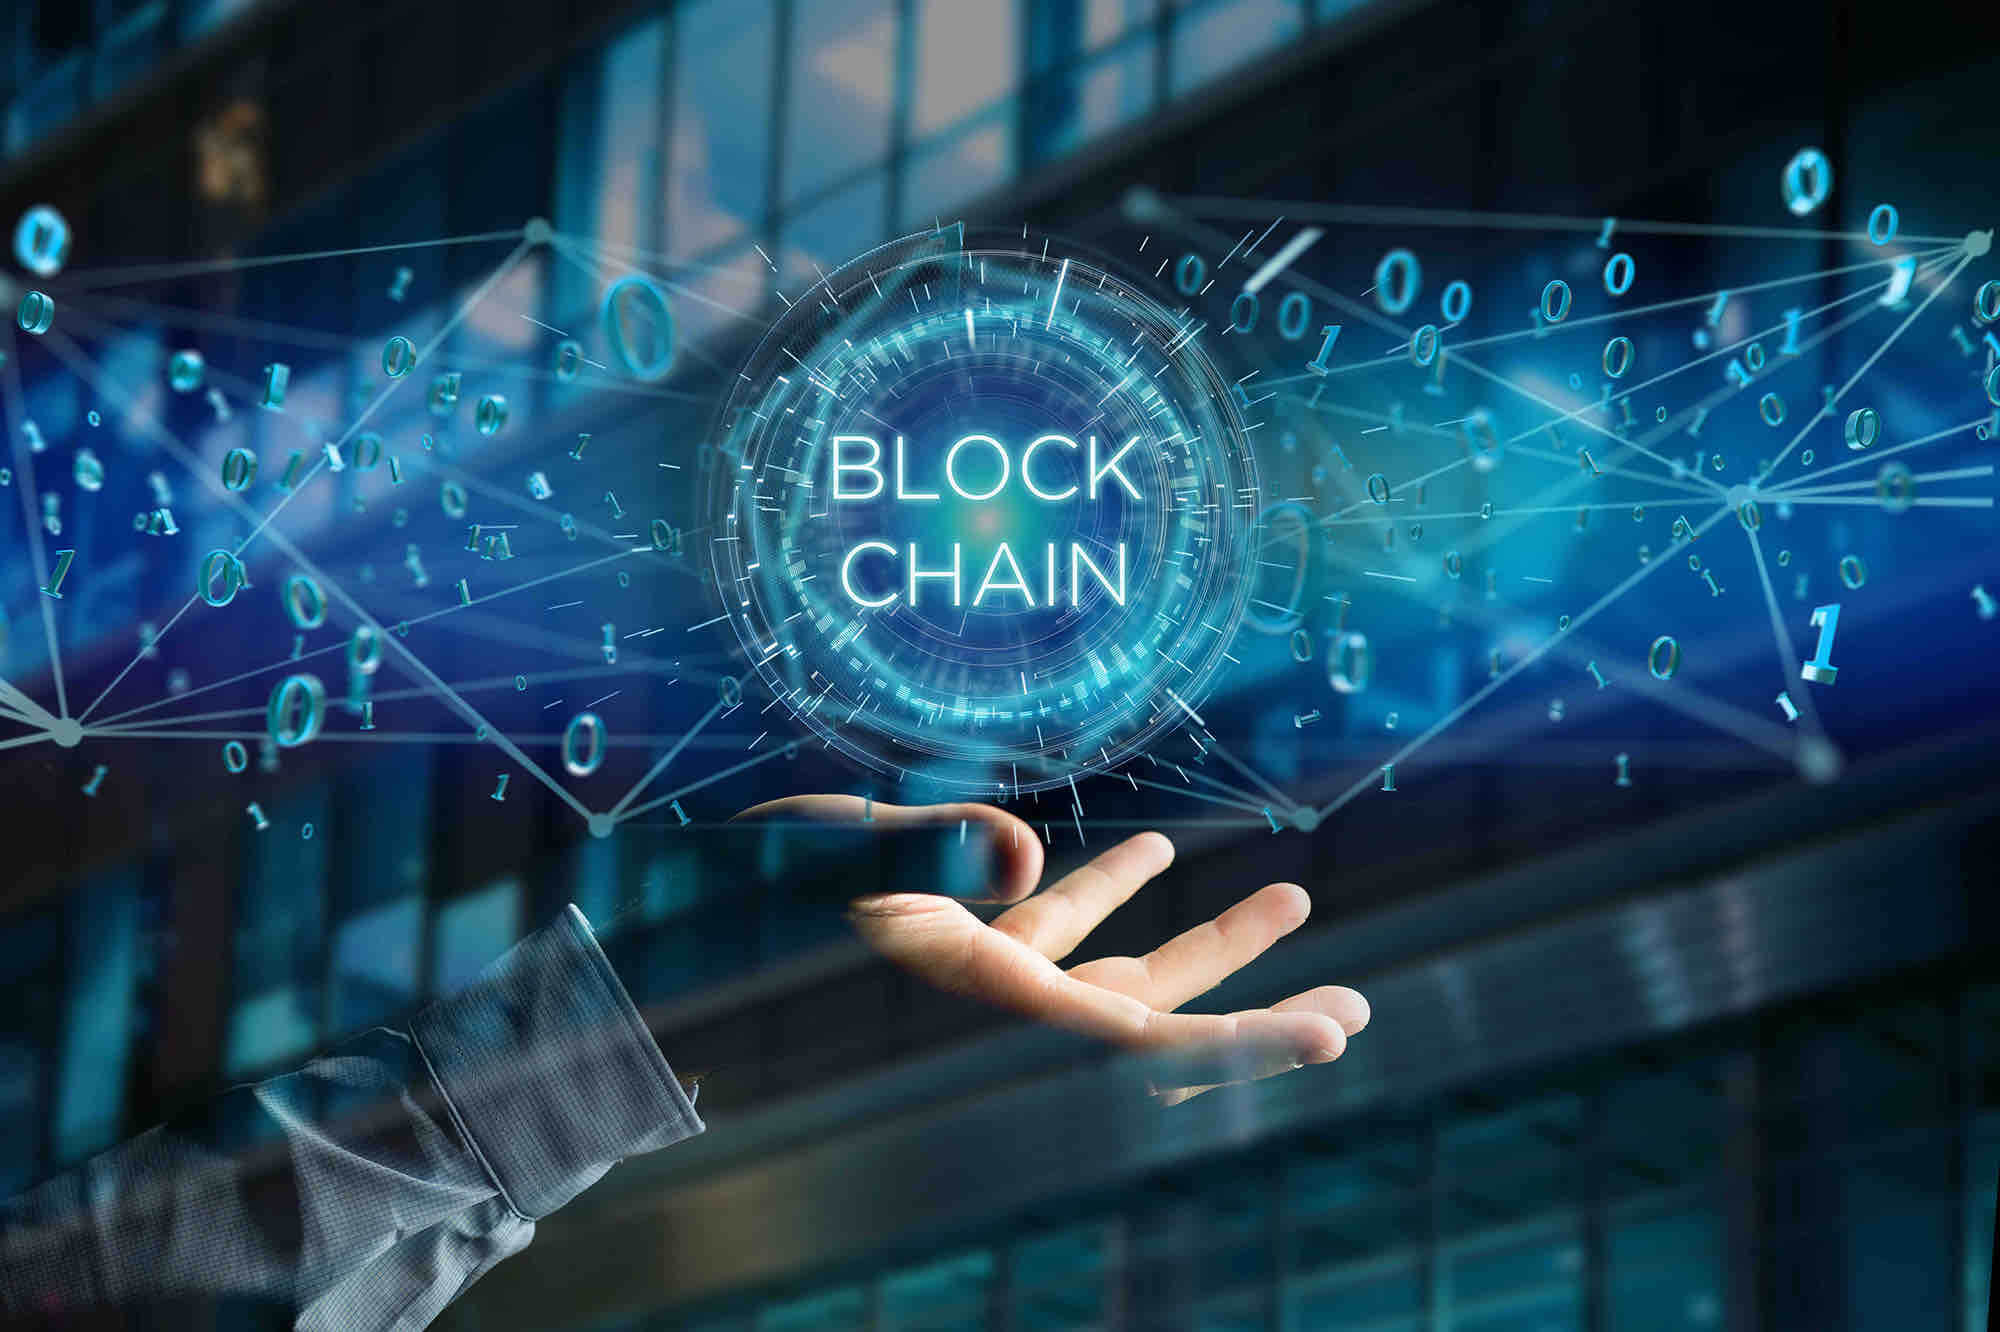 How Would The Client Benefit By Using Blockchain Technology To Train The Machine Learning Model?